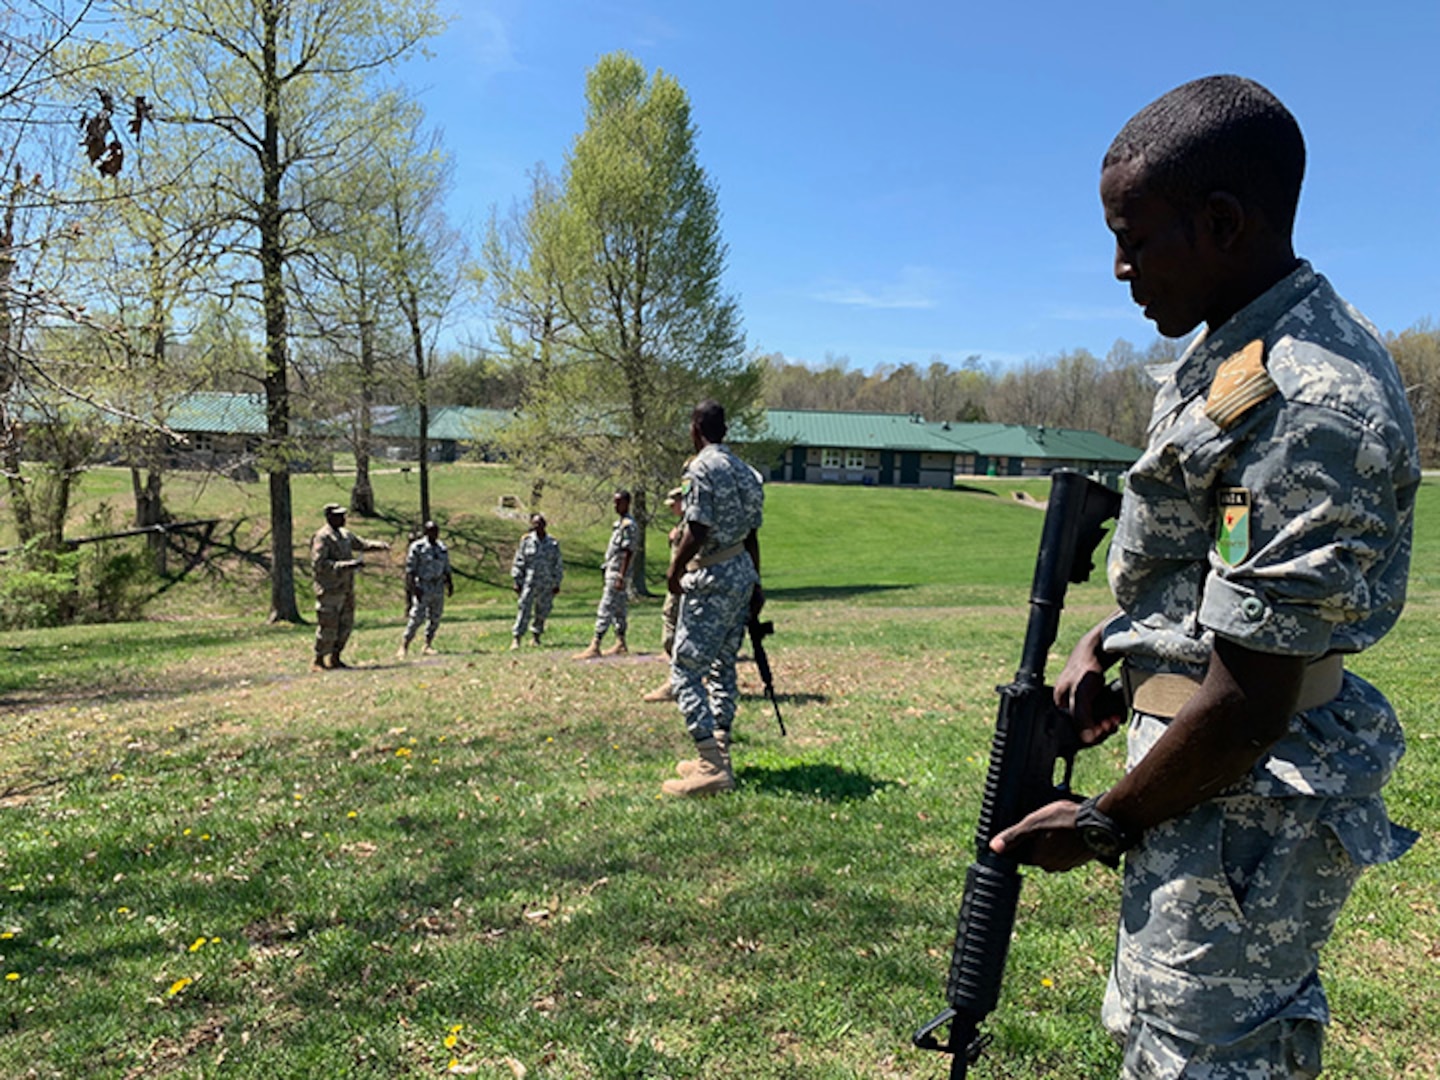 Members of the Djiboutian Military train with Kentucky National Guard’s officer and warrant officer candidates at Wendell H. Ford Regional Training Center in Greenville, Ky., April 11-14, 2019.